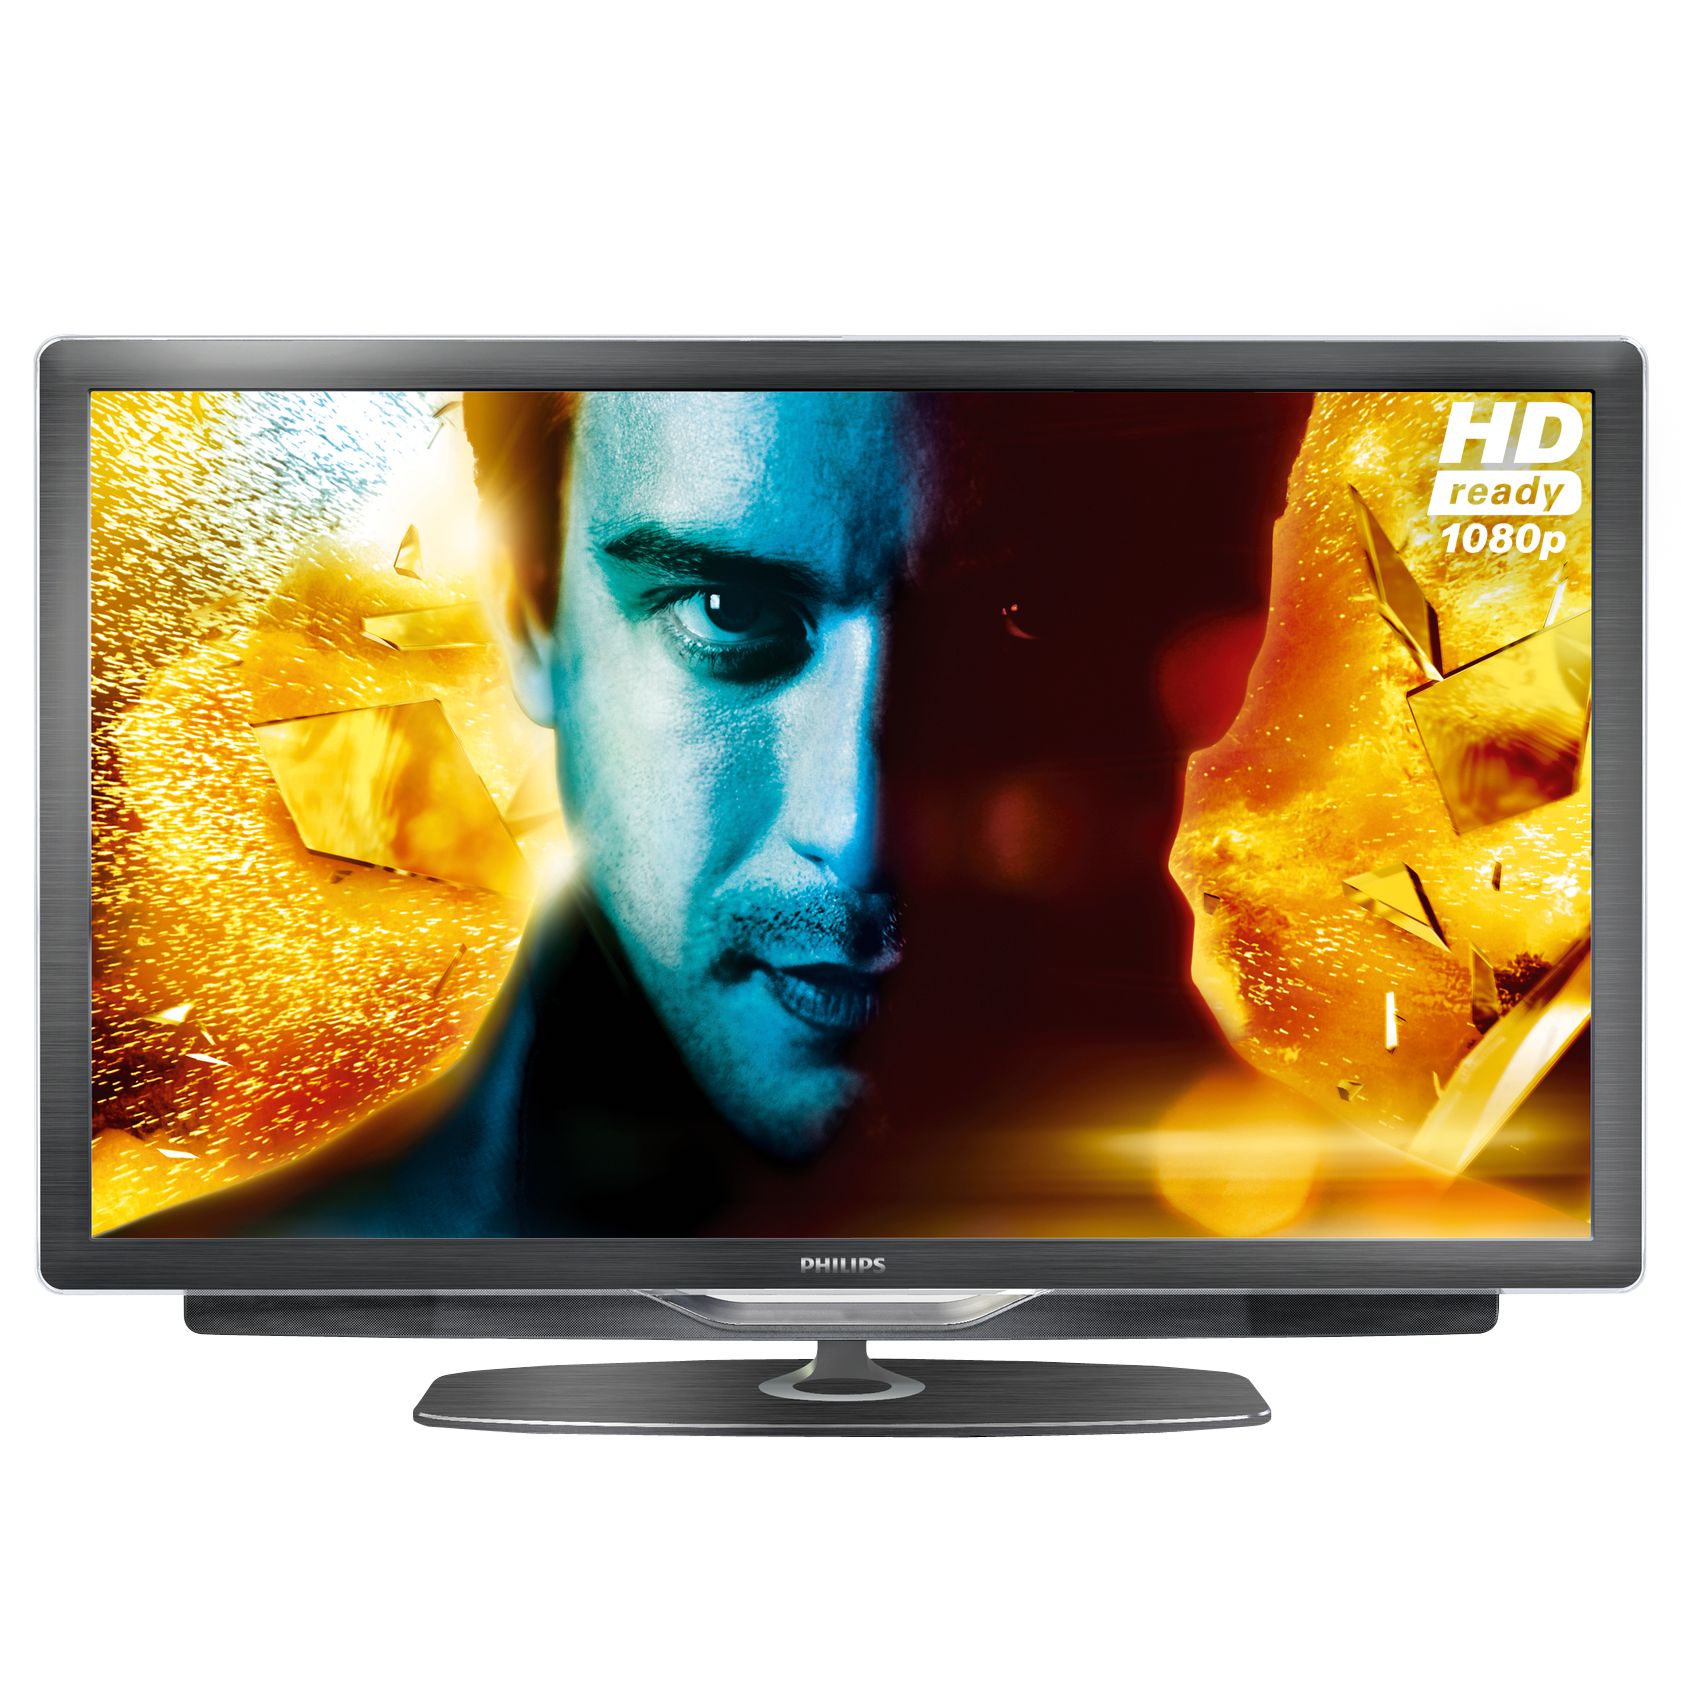 Philips 40PFL9705H/12 LCD/LED HD 1080p 3D Television, 40 Inch at JohnLewis